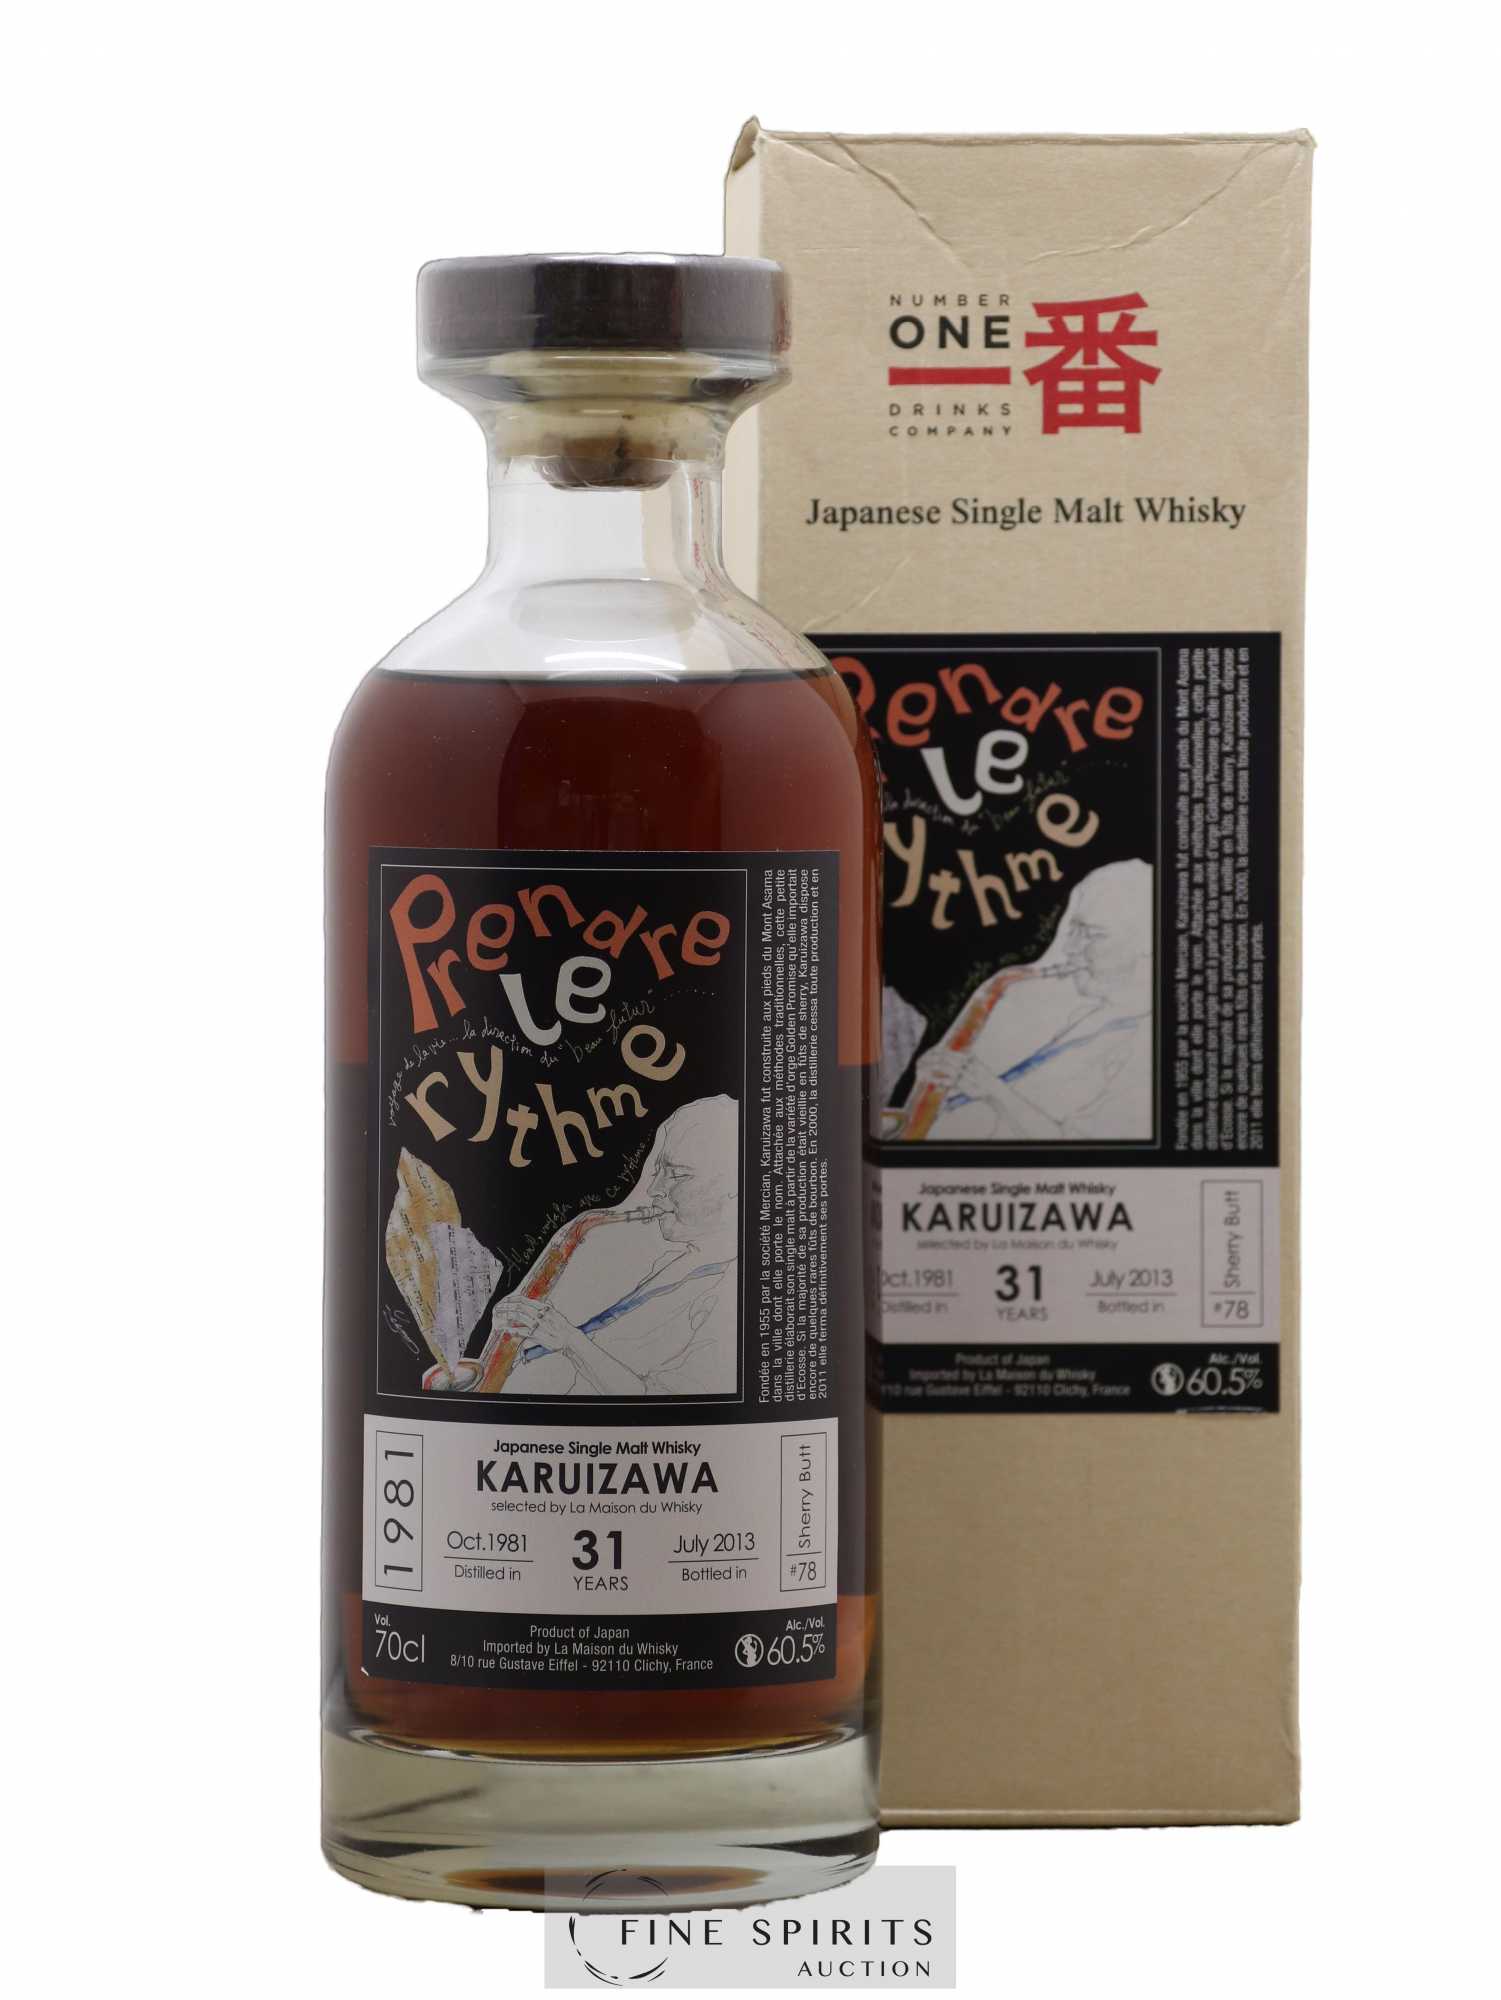 Karuizawa 31 years 1981 Number One Drinks Prendre le Rythme Sherry But n°78 - bottled 2013 LMDW 